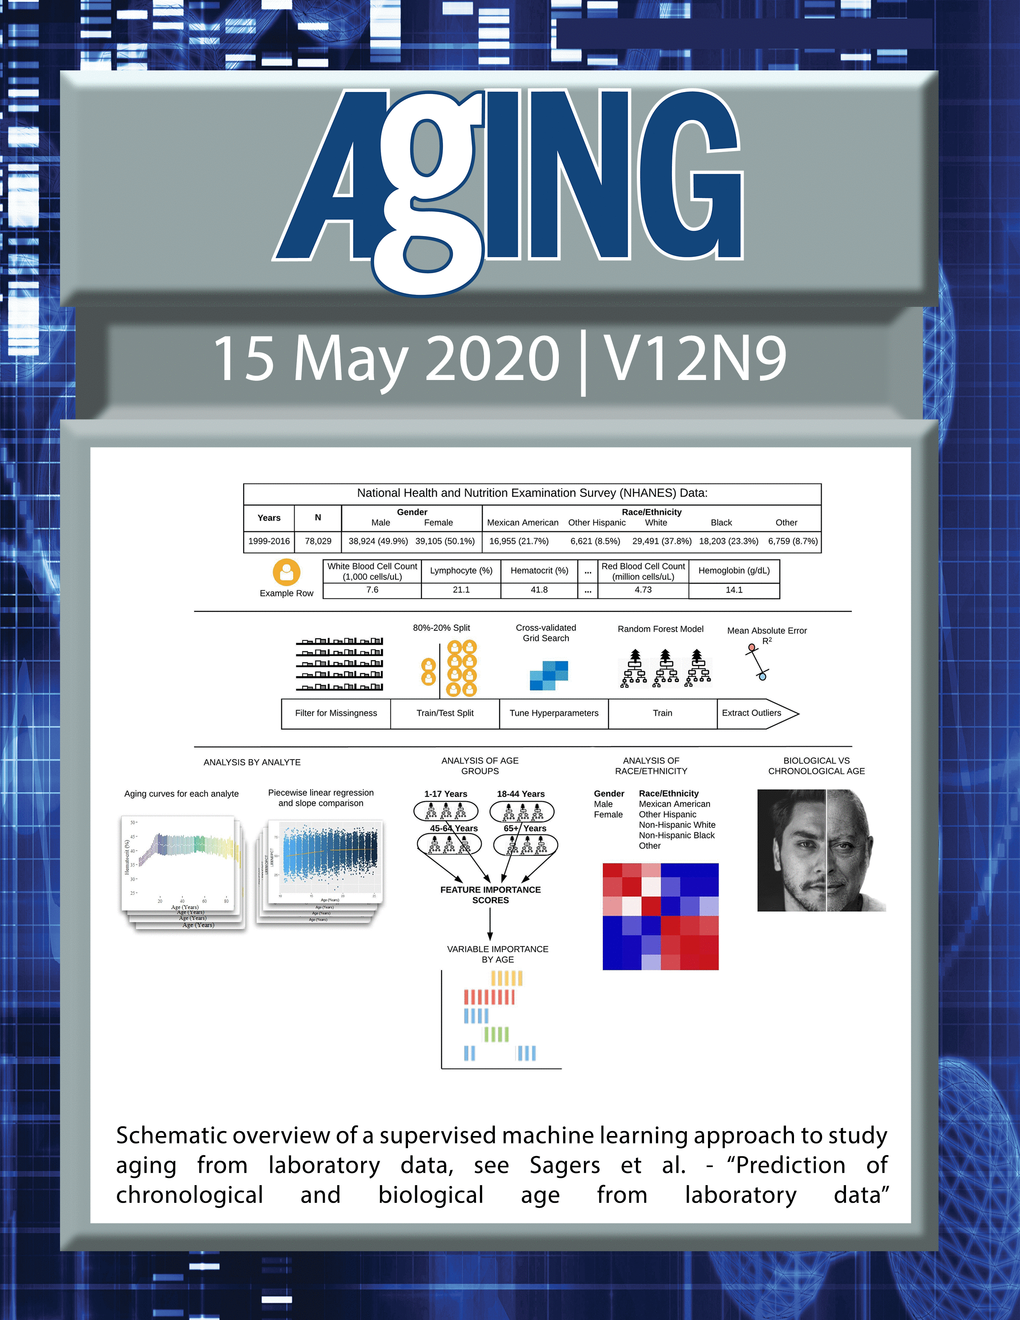 The cover features Figure 1 "Schematic overview of a supervised machine learning approach to study aging from laboratory data" from Sagers et al.